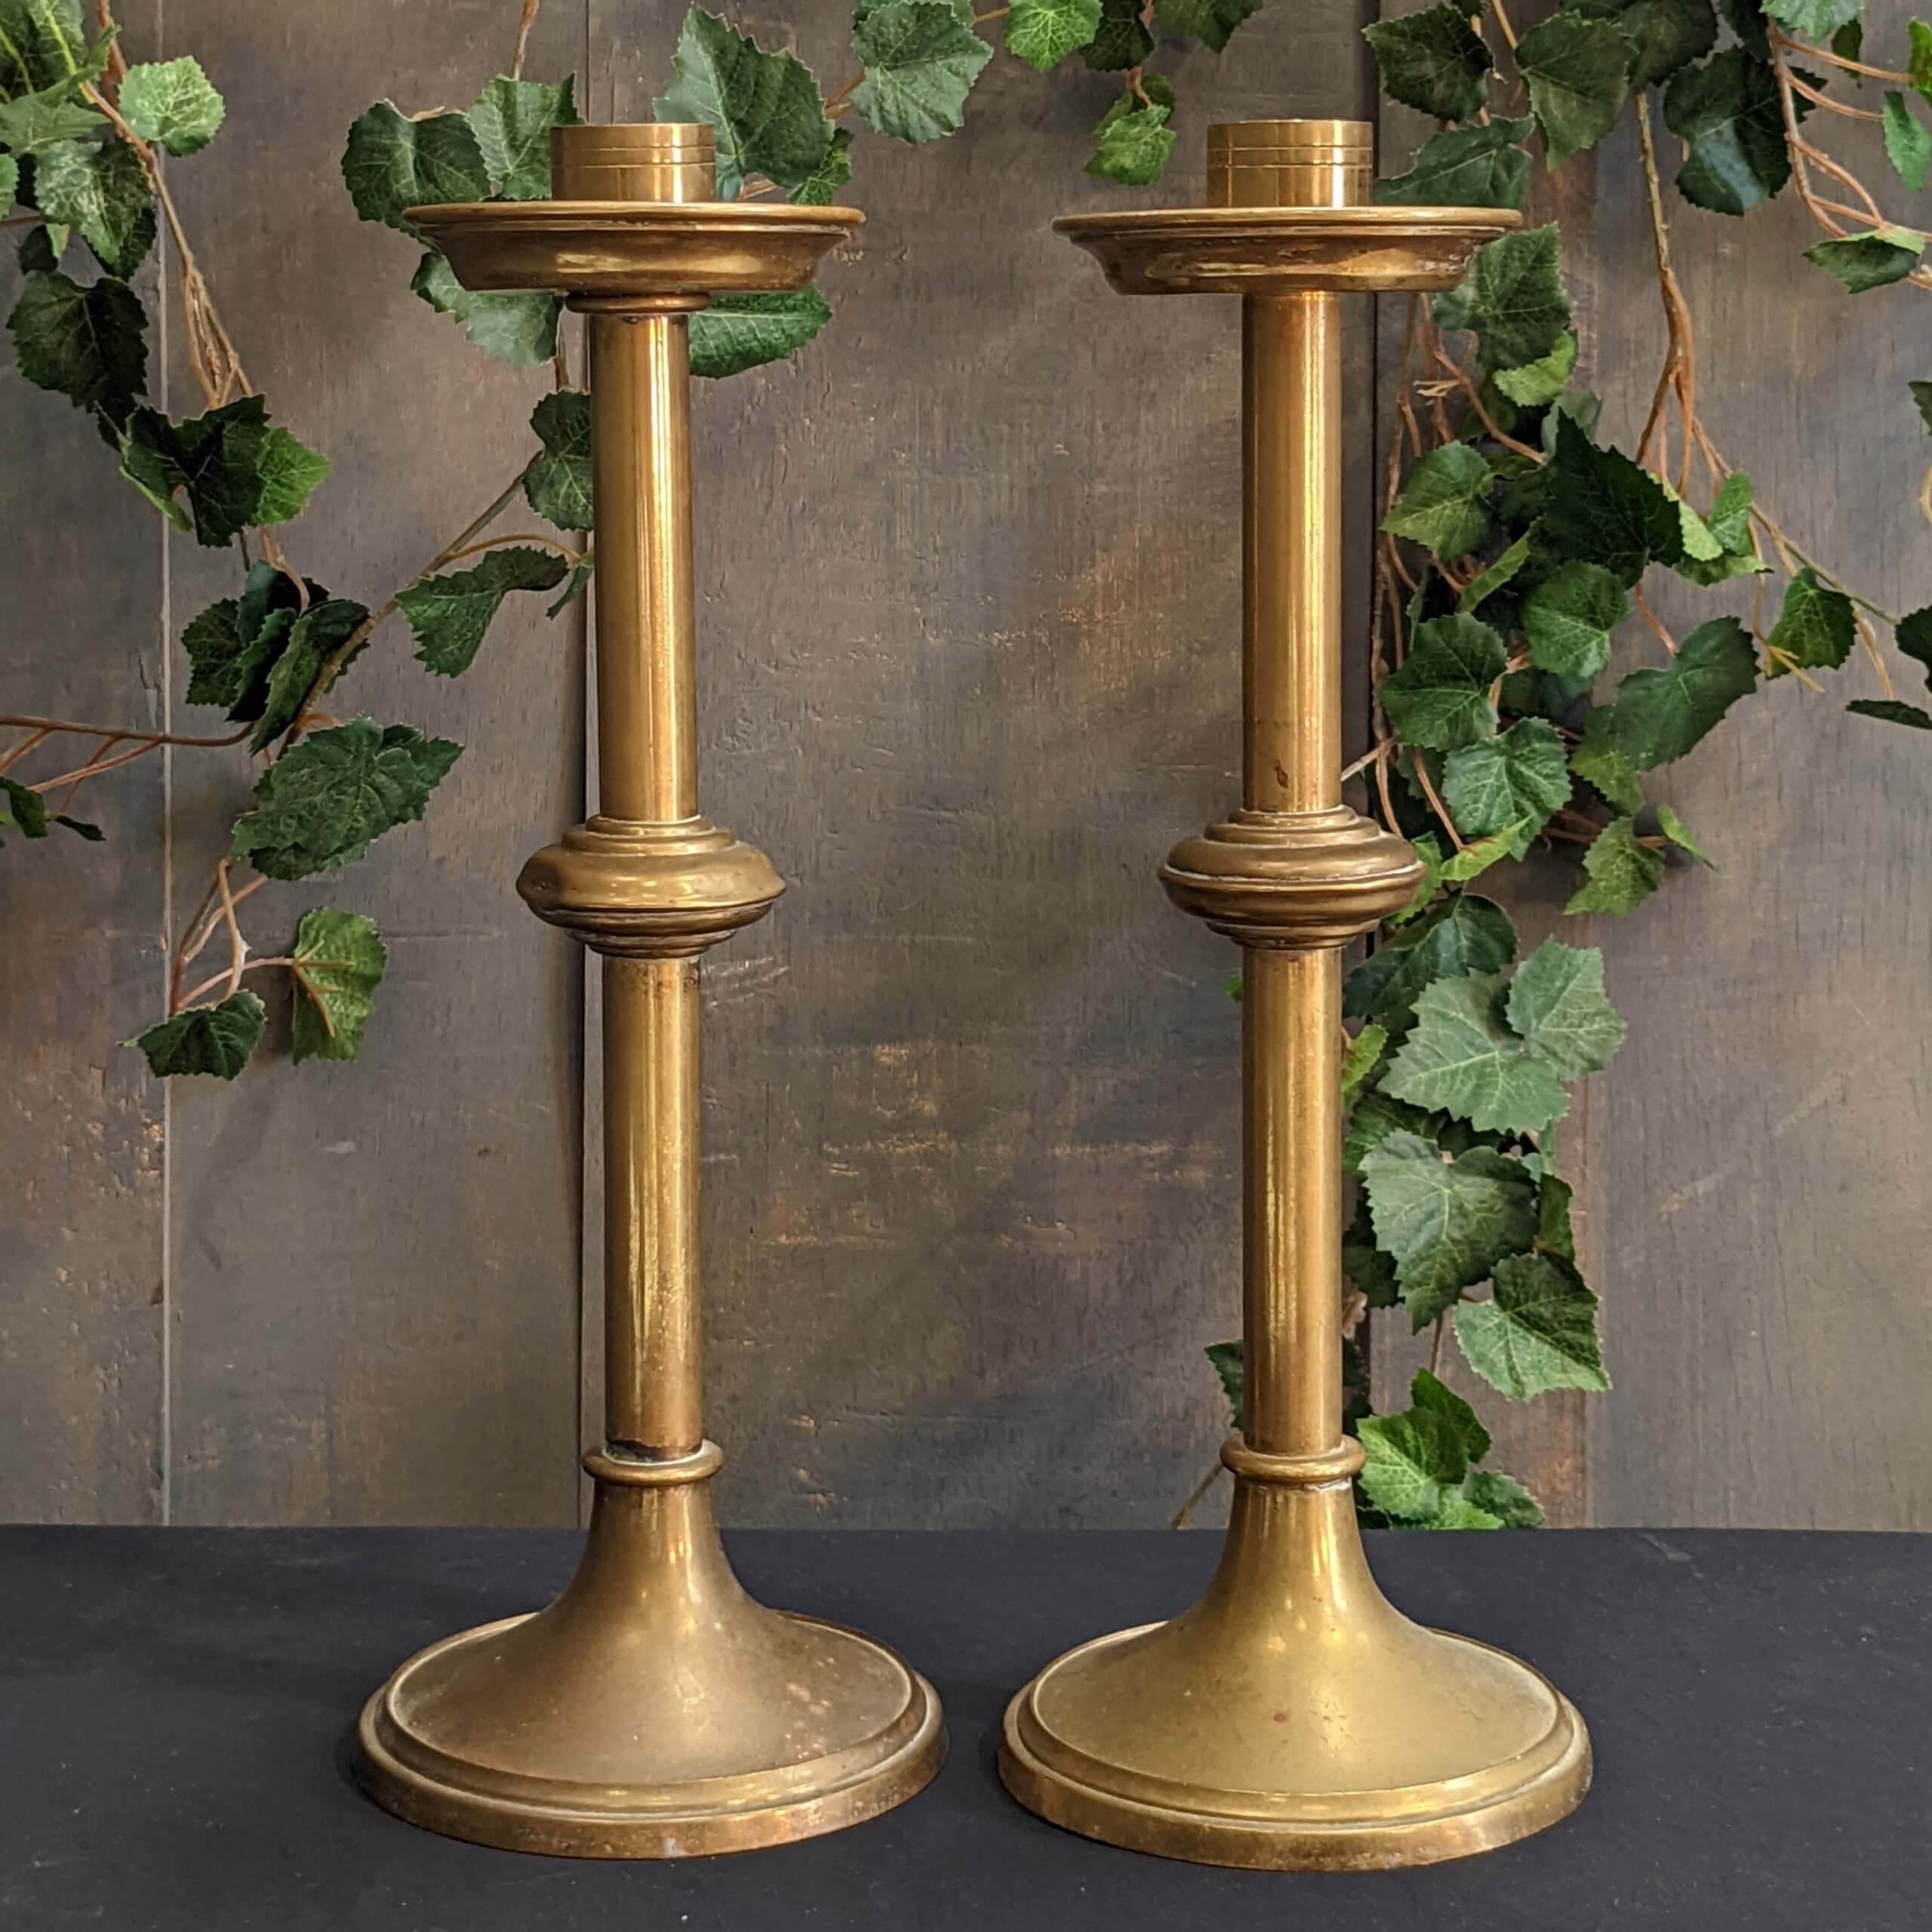 Taller Vintage Classic Brass Church Candlesticks for Larger Candles (SOLD)  - Antique Church Furnishings